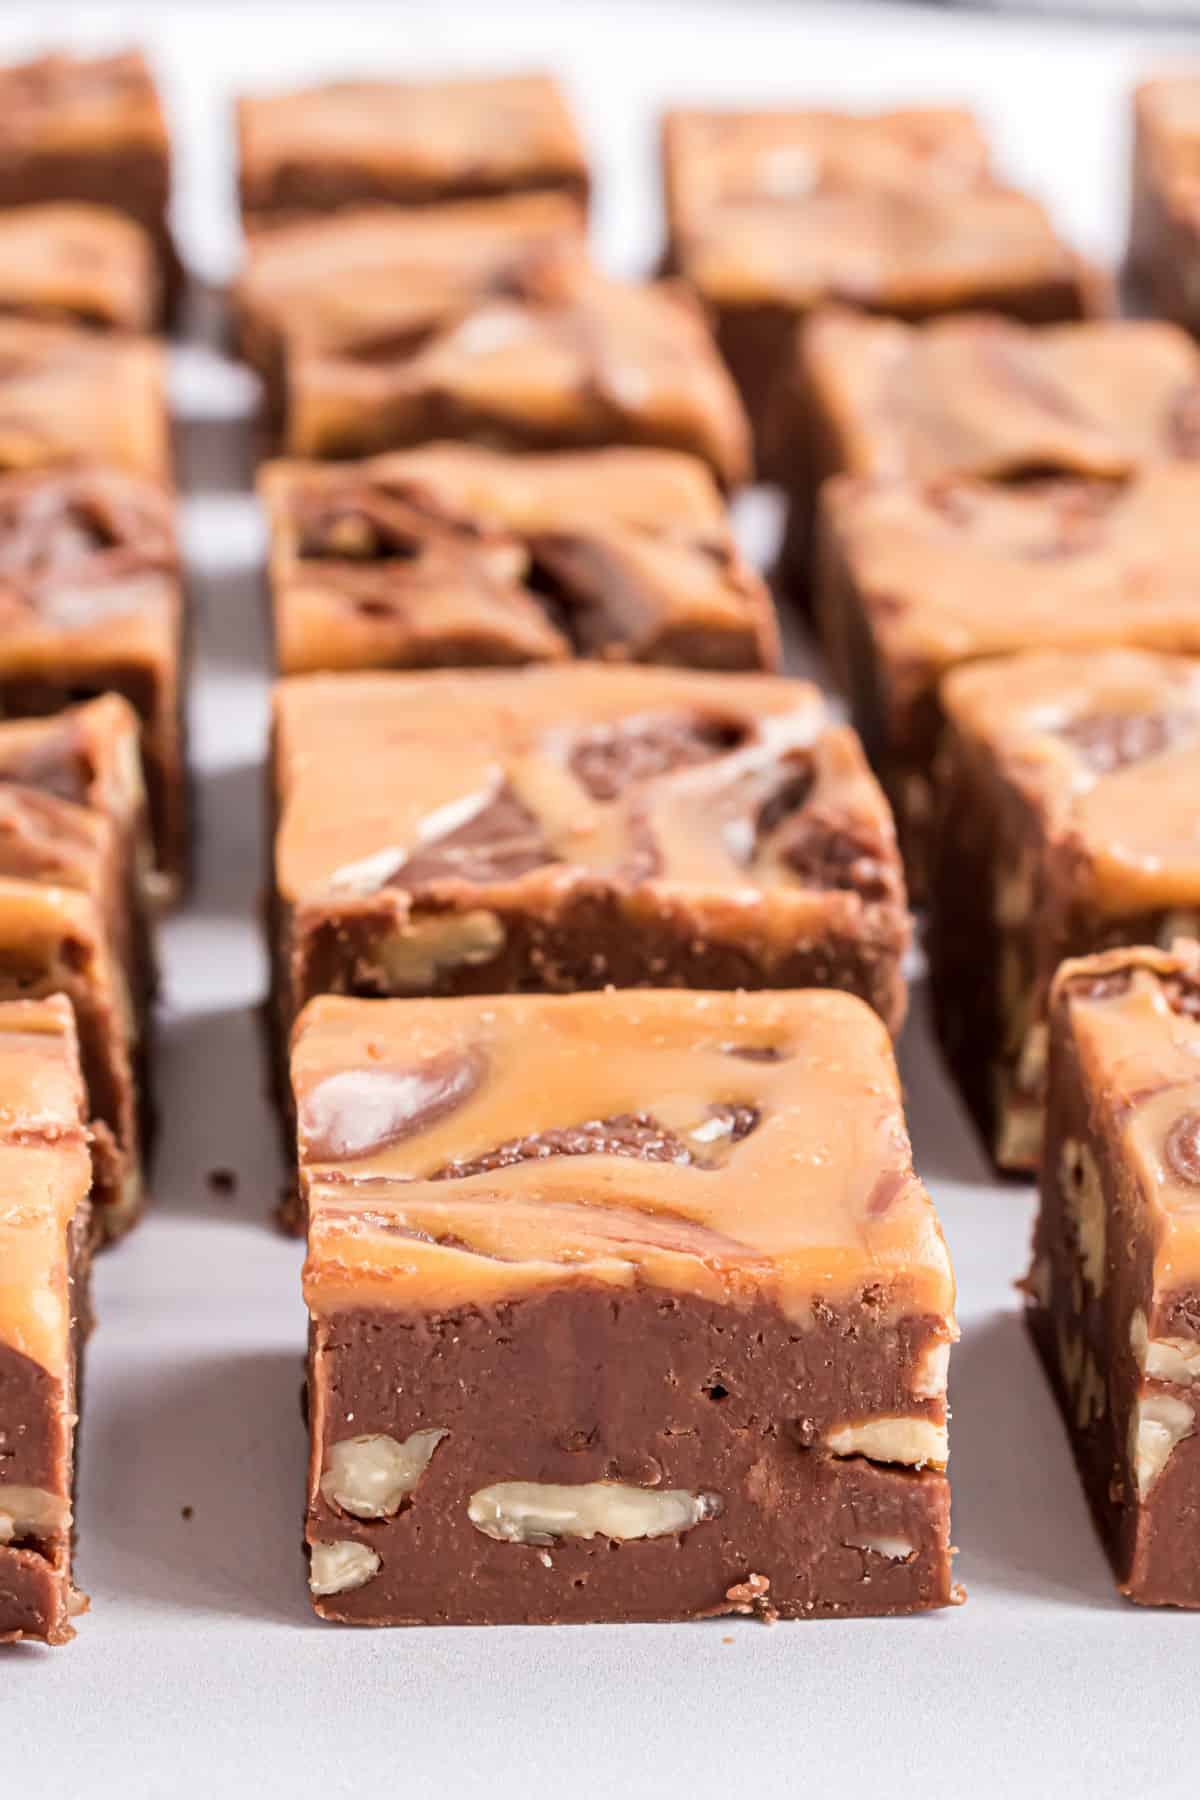 Pieces of chocolate fudge with pecans and caramel cut into squares.